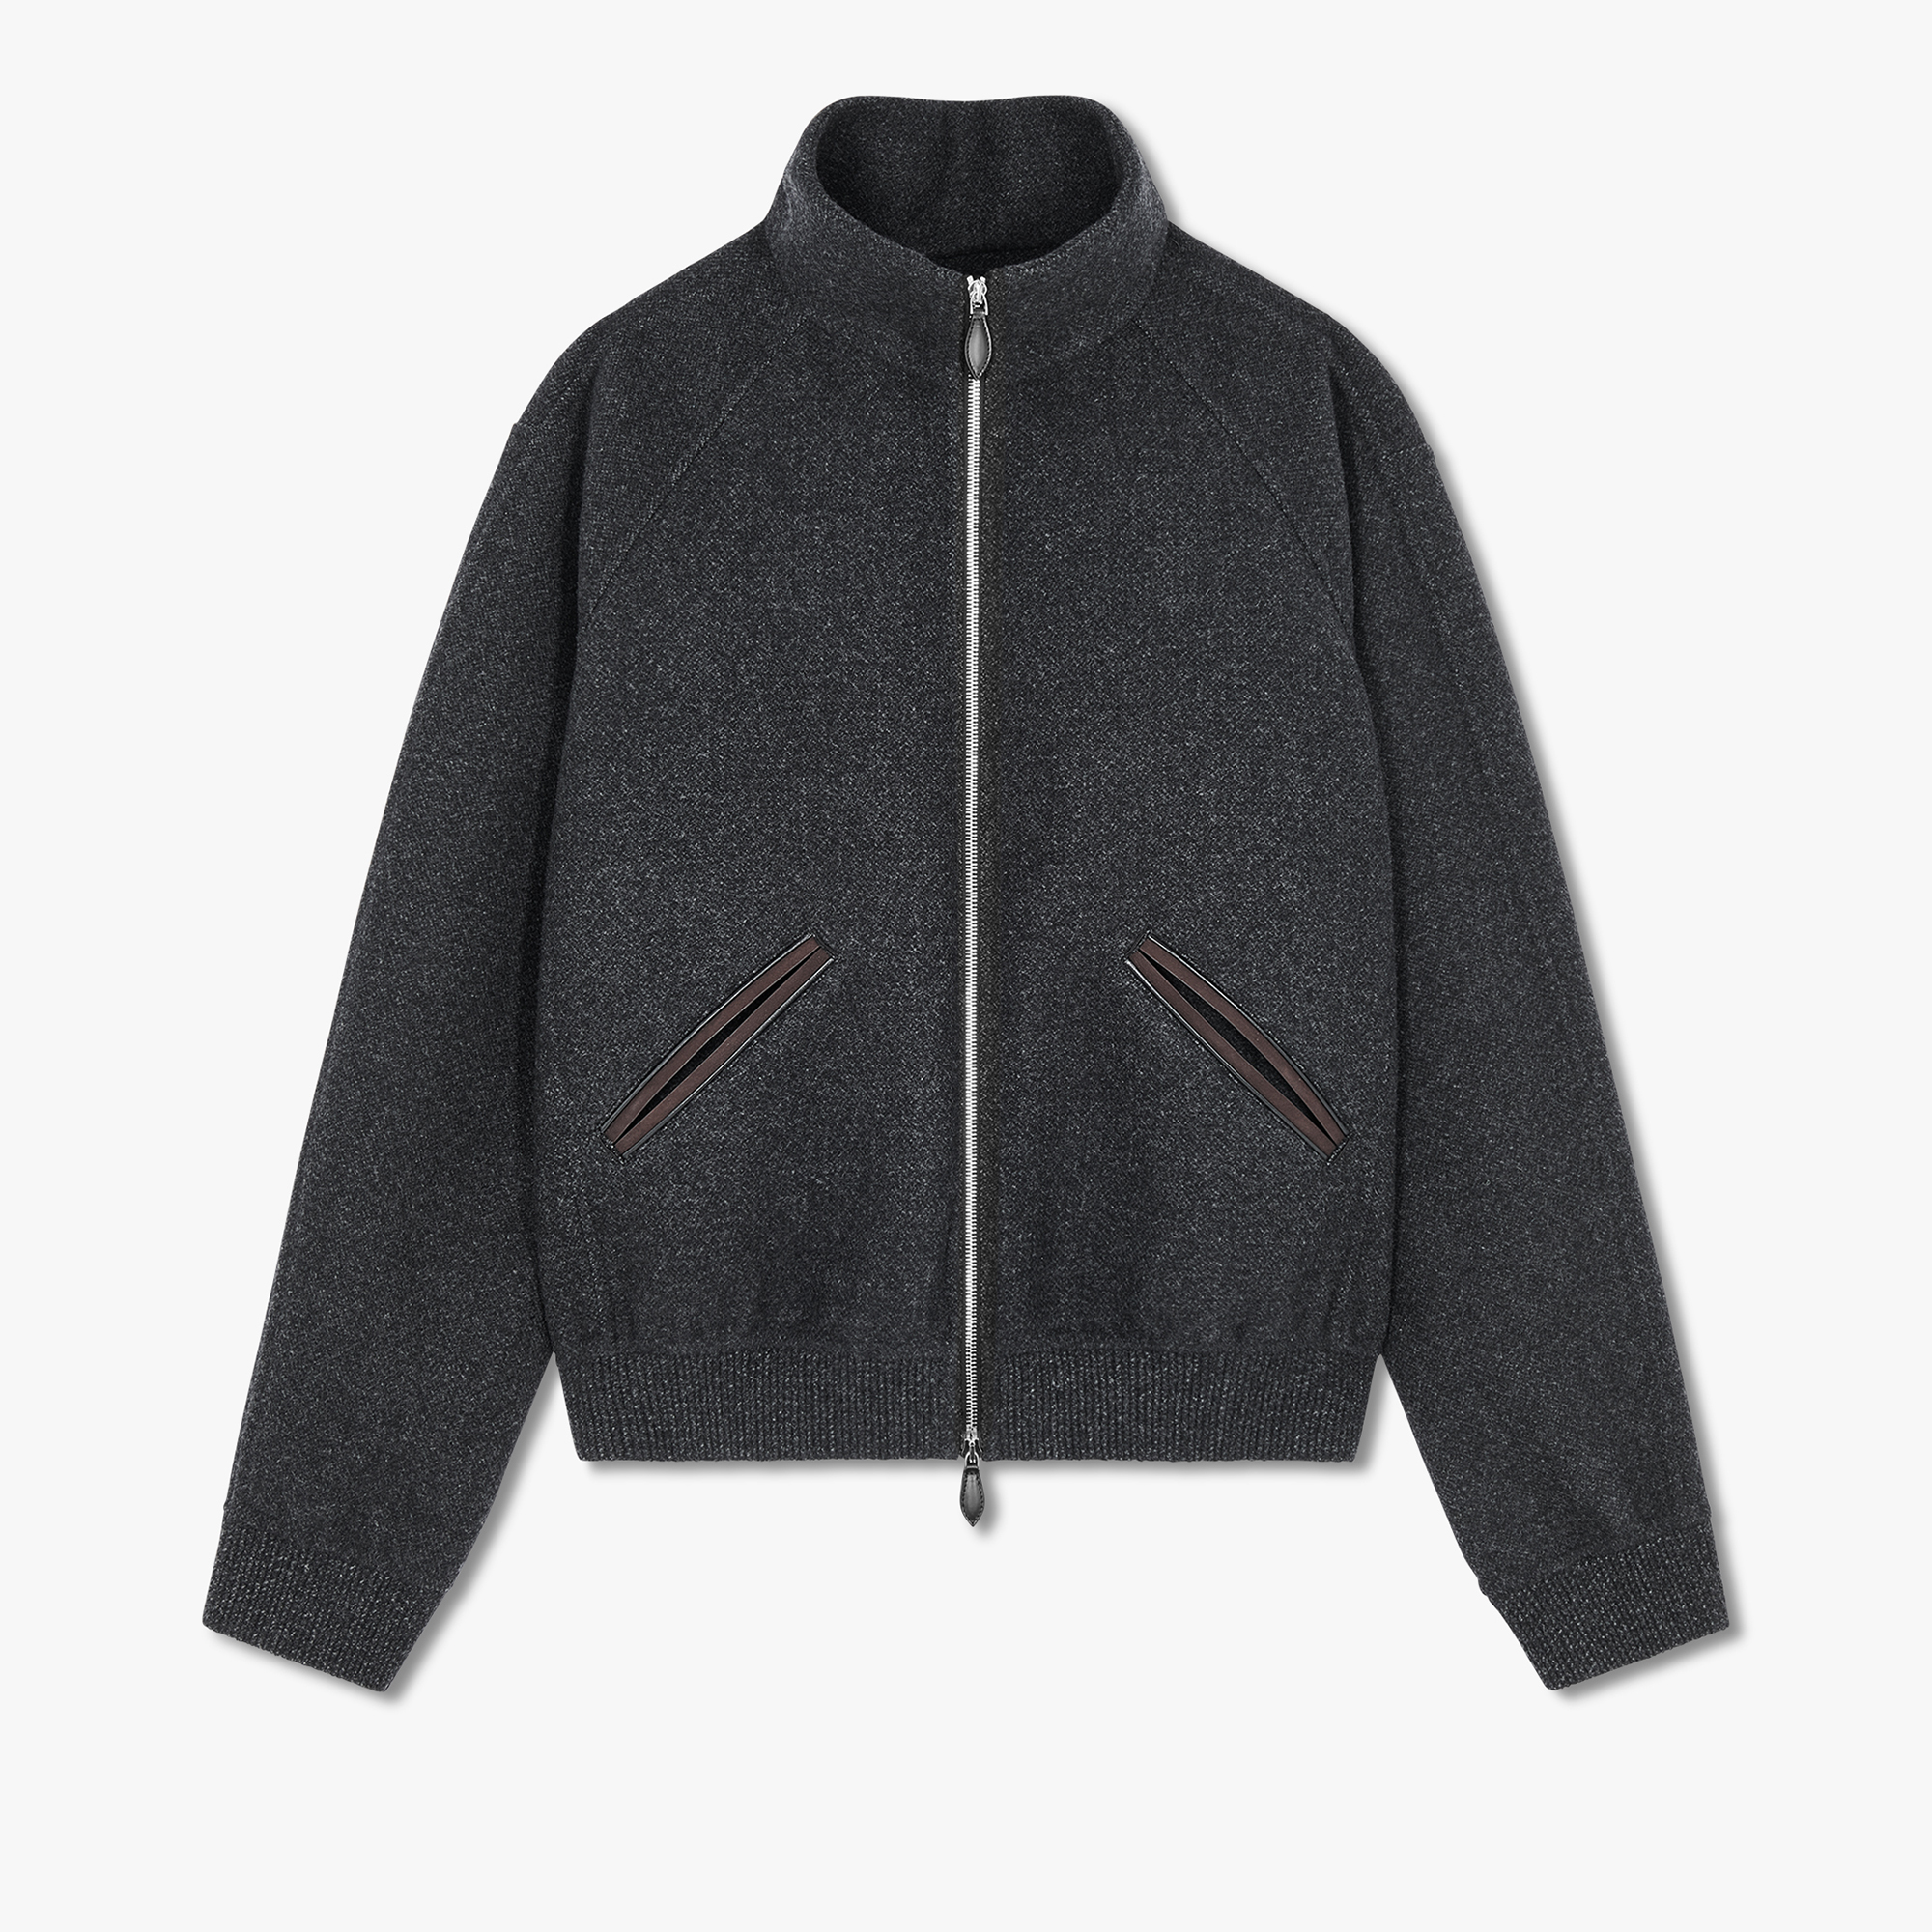 Double Face Cashmere Track Jacket, DARK CHARCOAL, hi-res